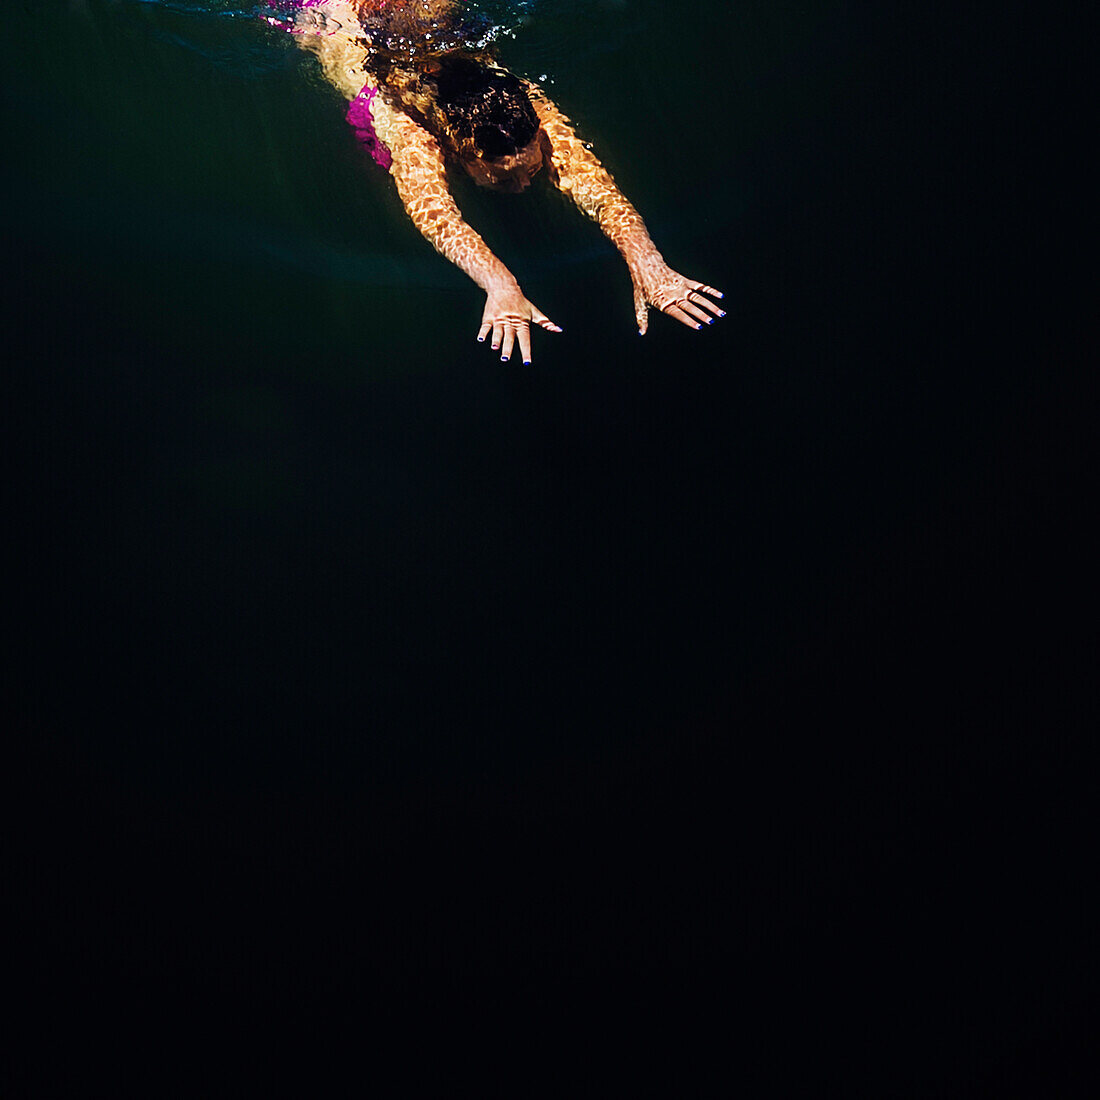 Elevated view of a woman emerging from underwater in the Russian River in Monte Rio, California.